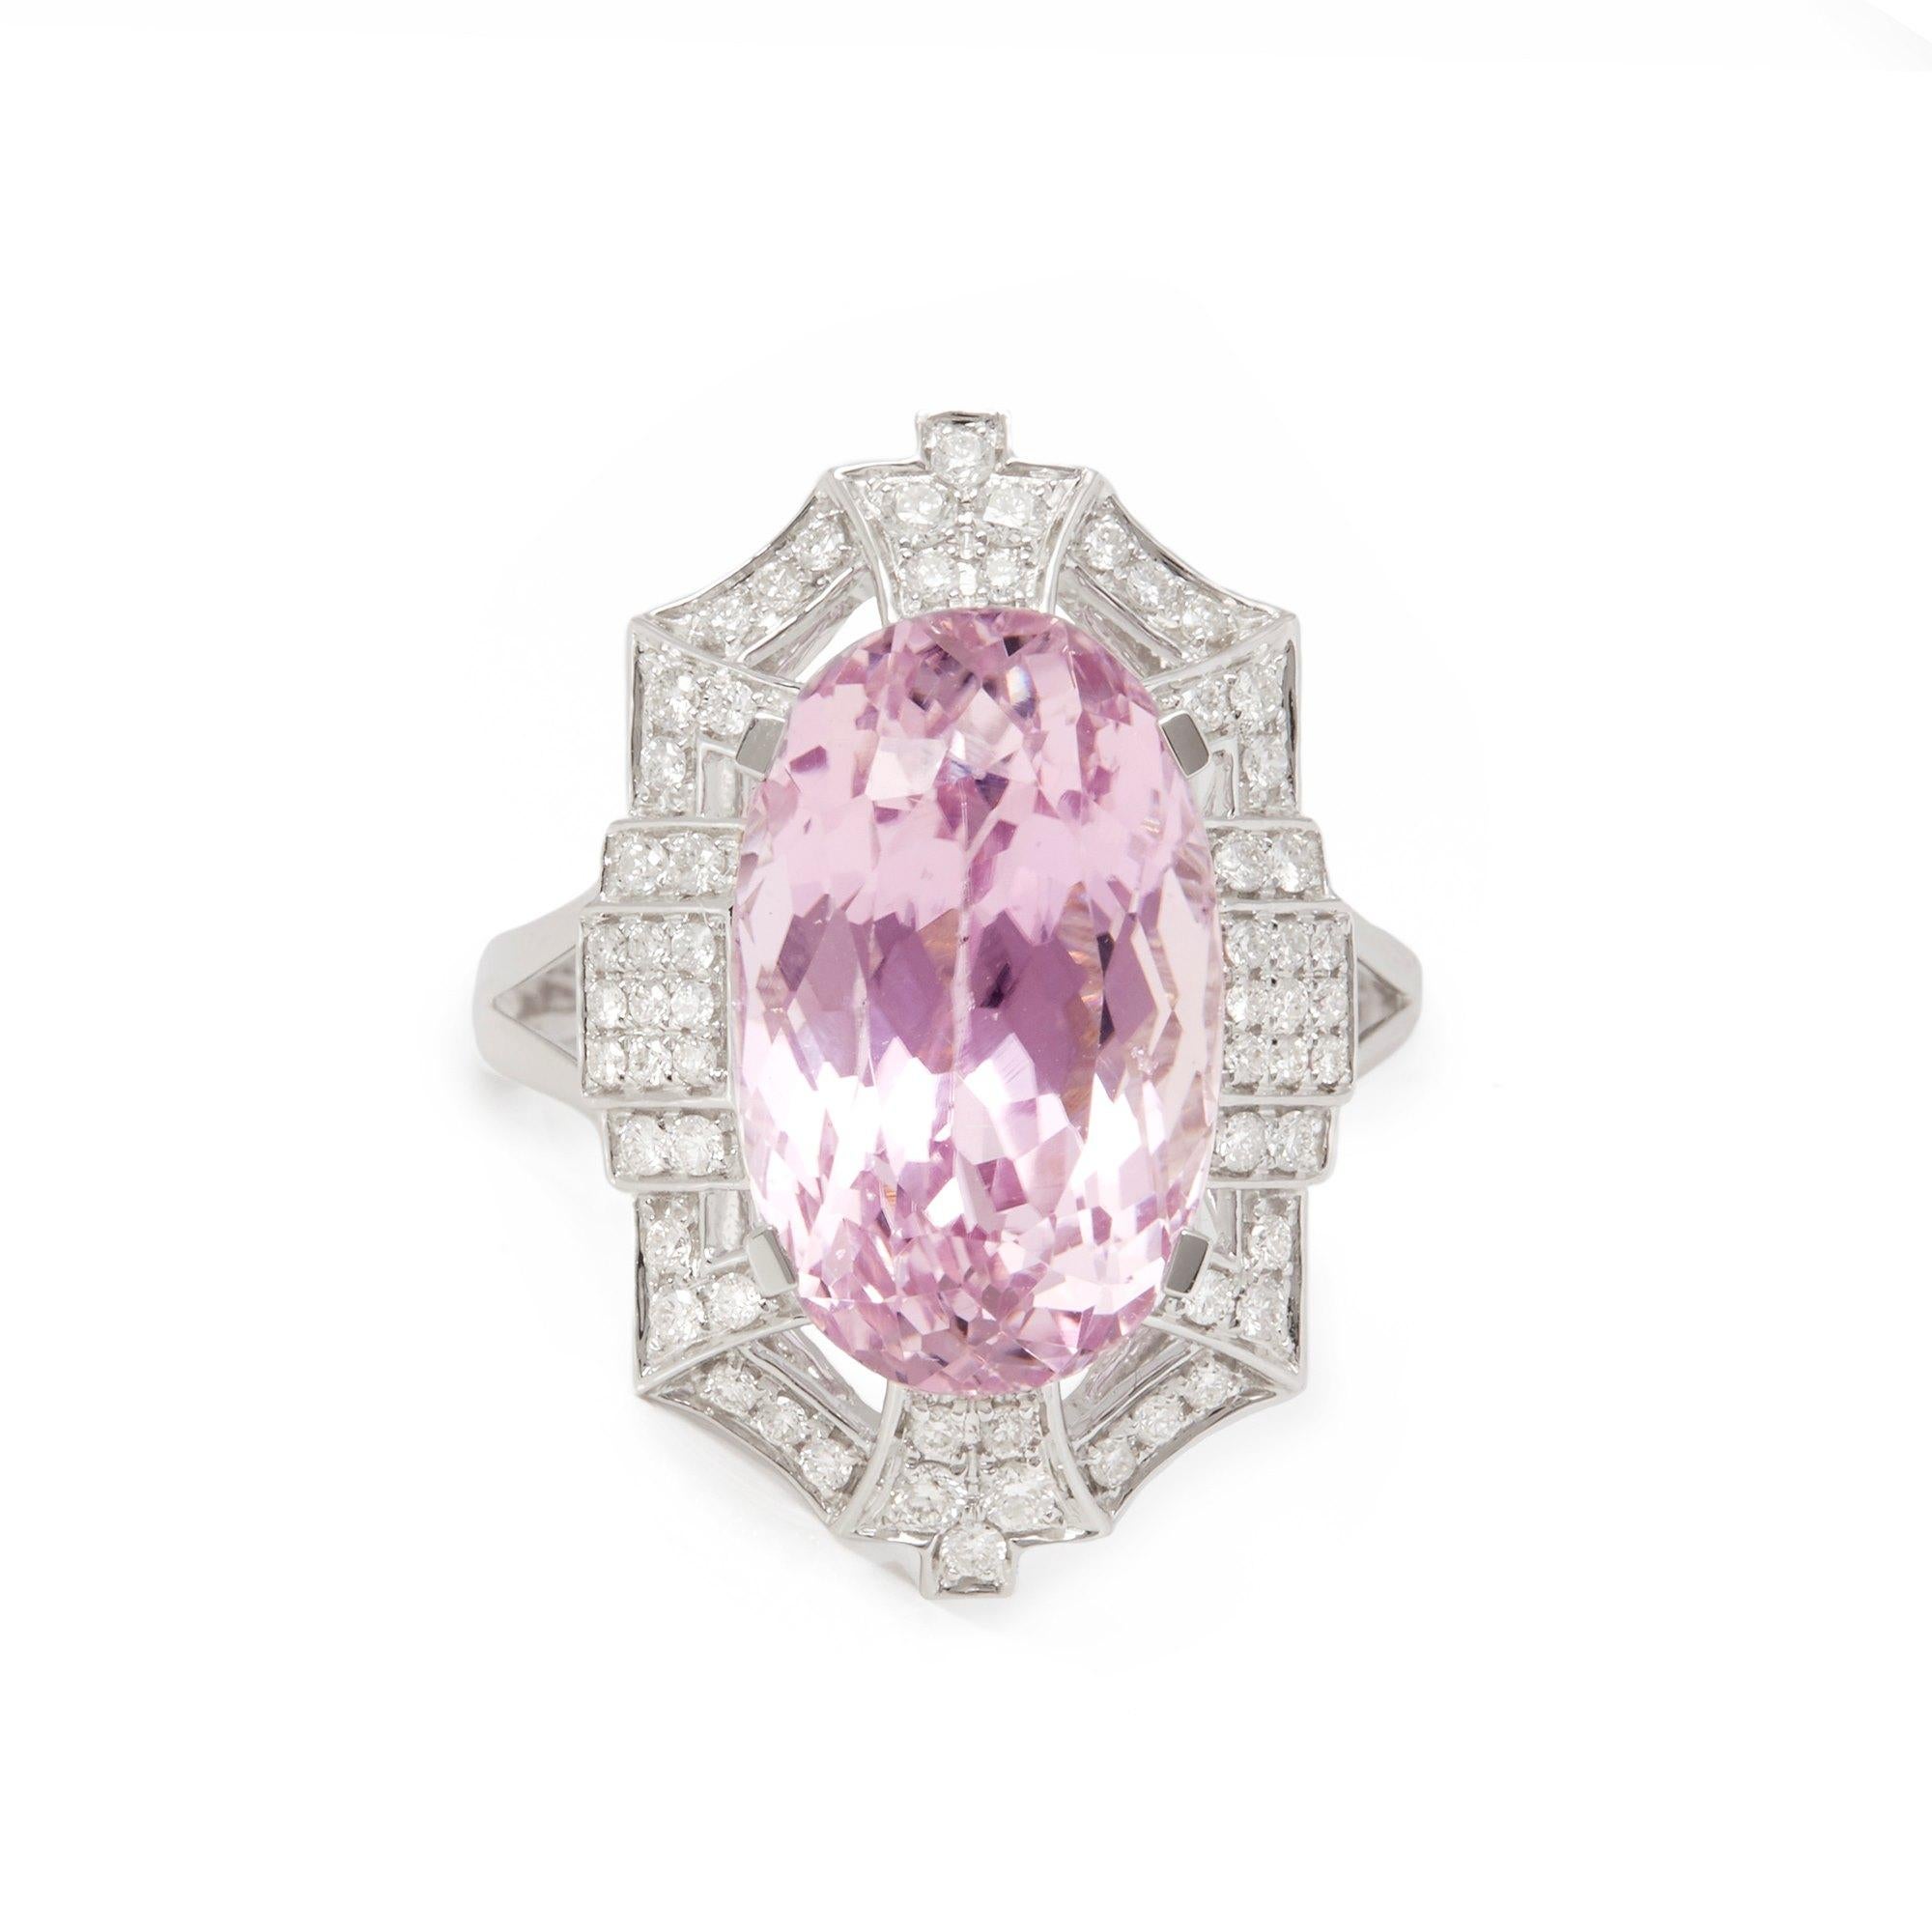 This ring designed by David Jerome is from his private collection and features one natural unheated oval cut kunzite totalling 9.91cts sourced in Afghanistan. Set with round brilliant cut Diamonds totalling 0.41cts mounted in an 18k white gold